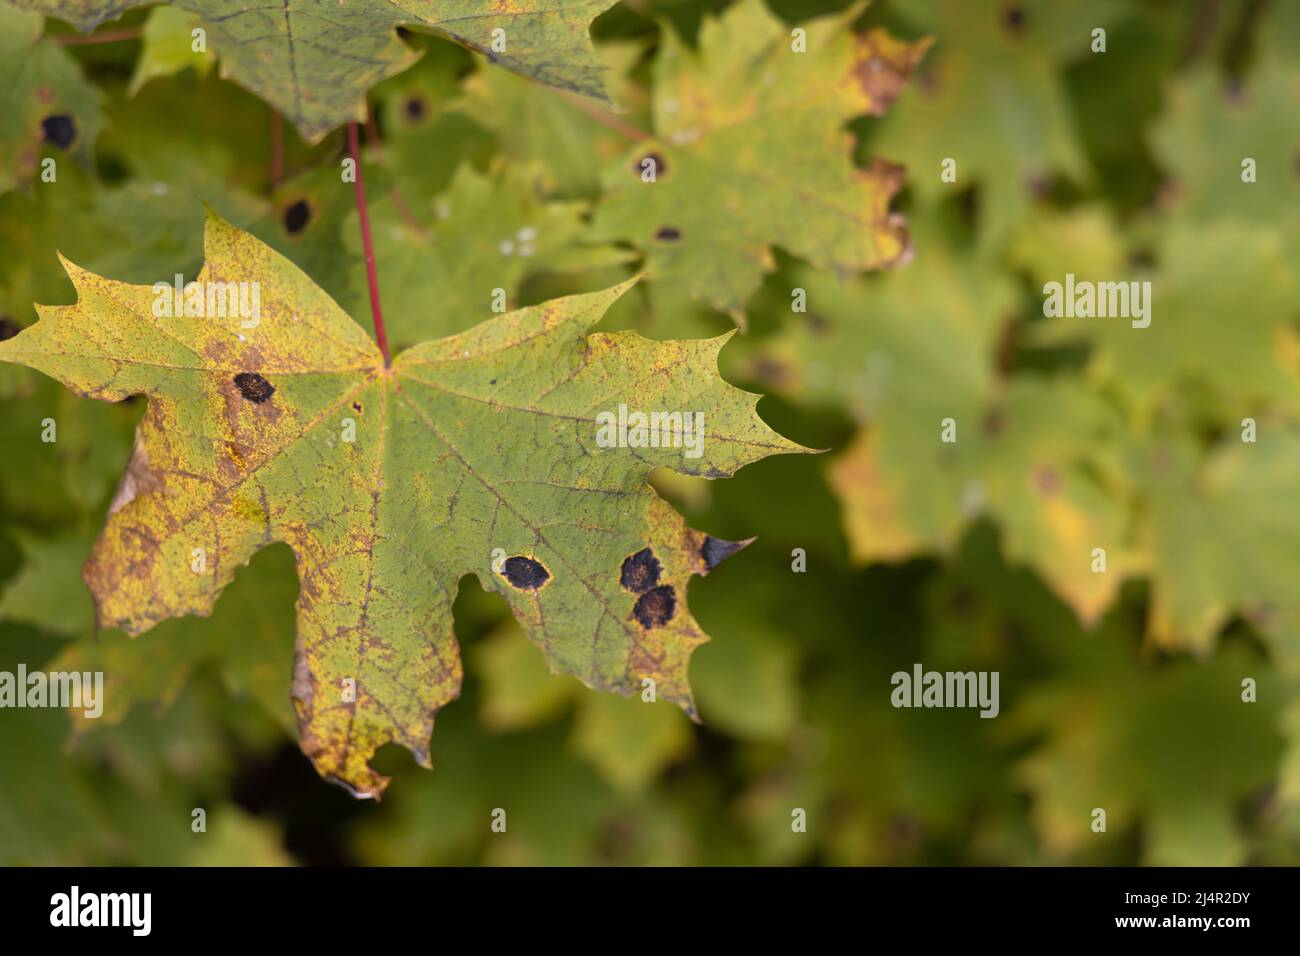 One maple leaf infected with a plant pathogen on a blurred background closeup Stock Photo